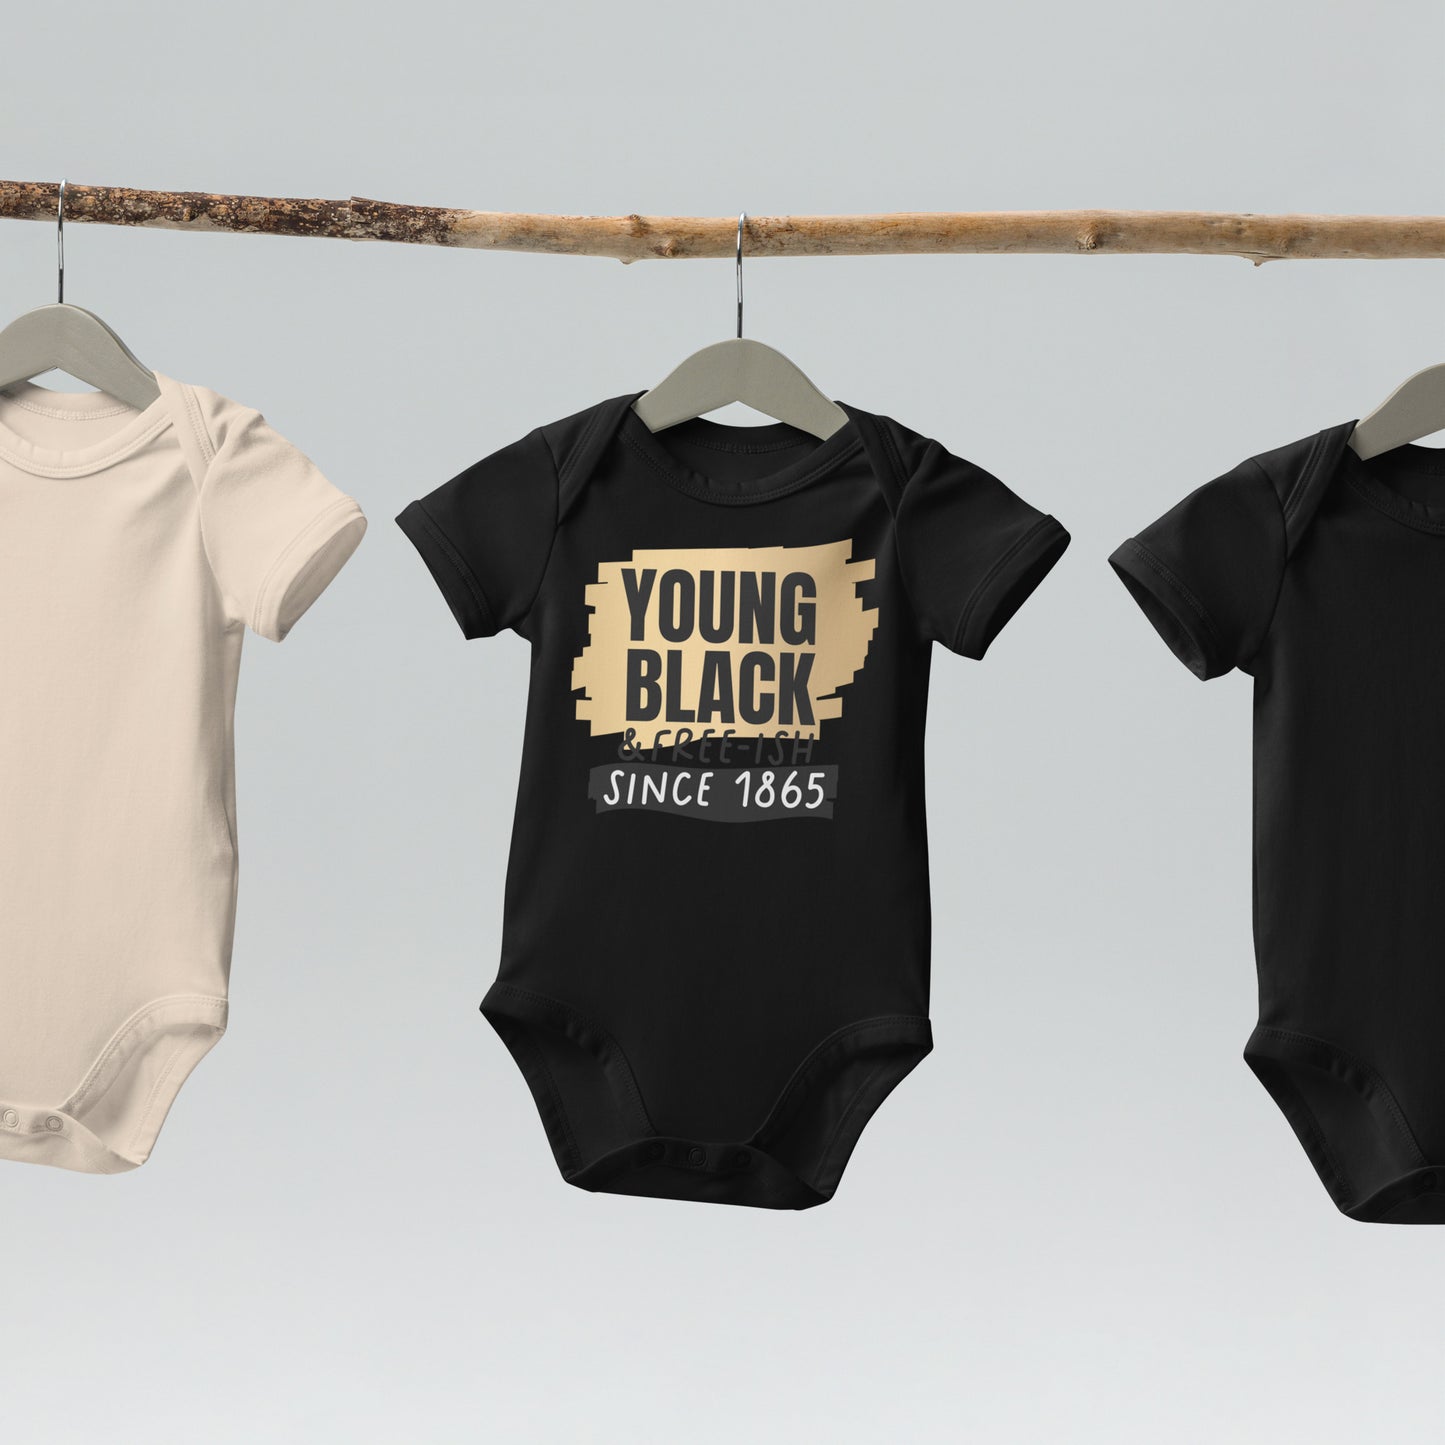 Organic cotton baby bodysuit -  Juneteenth Young Black Freeish Since 1865